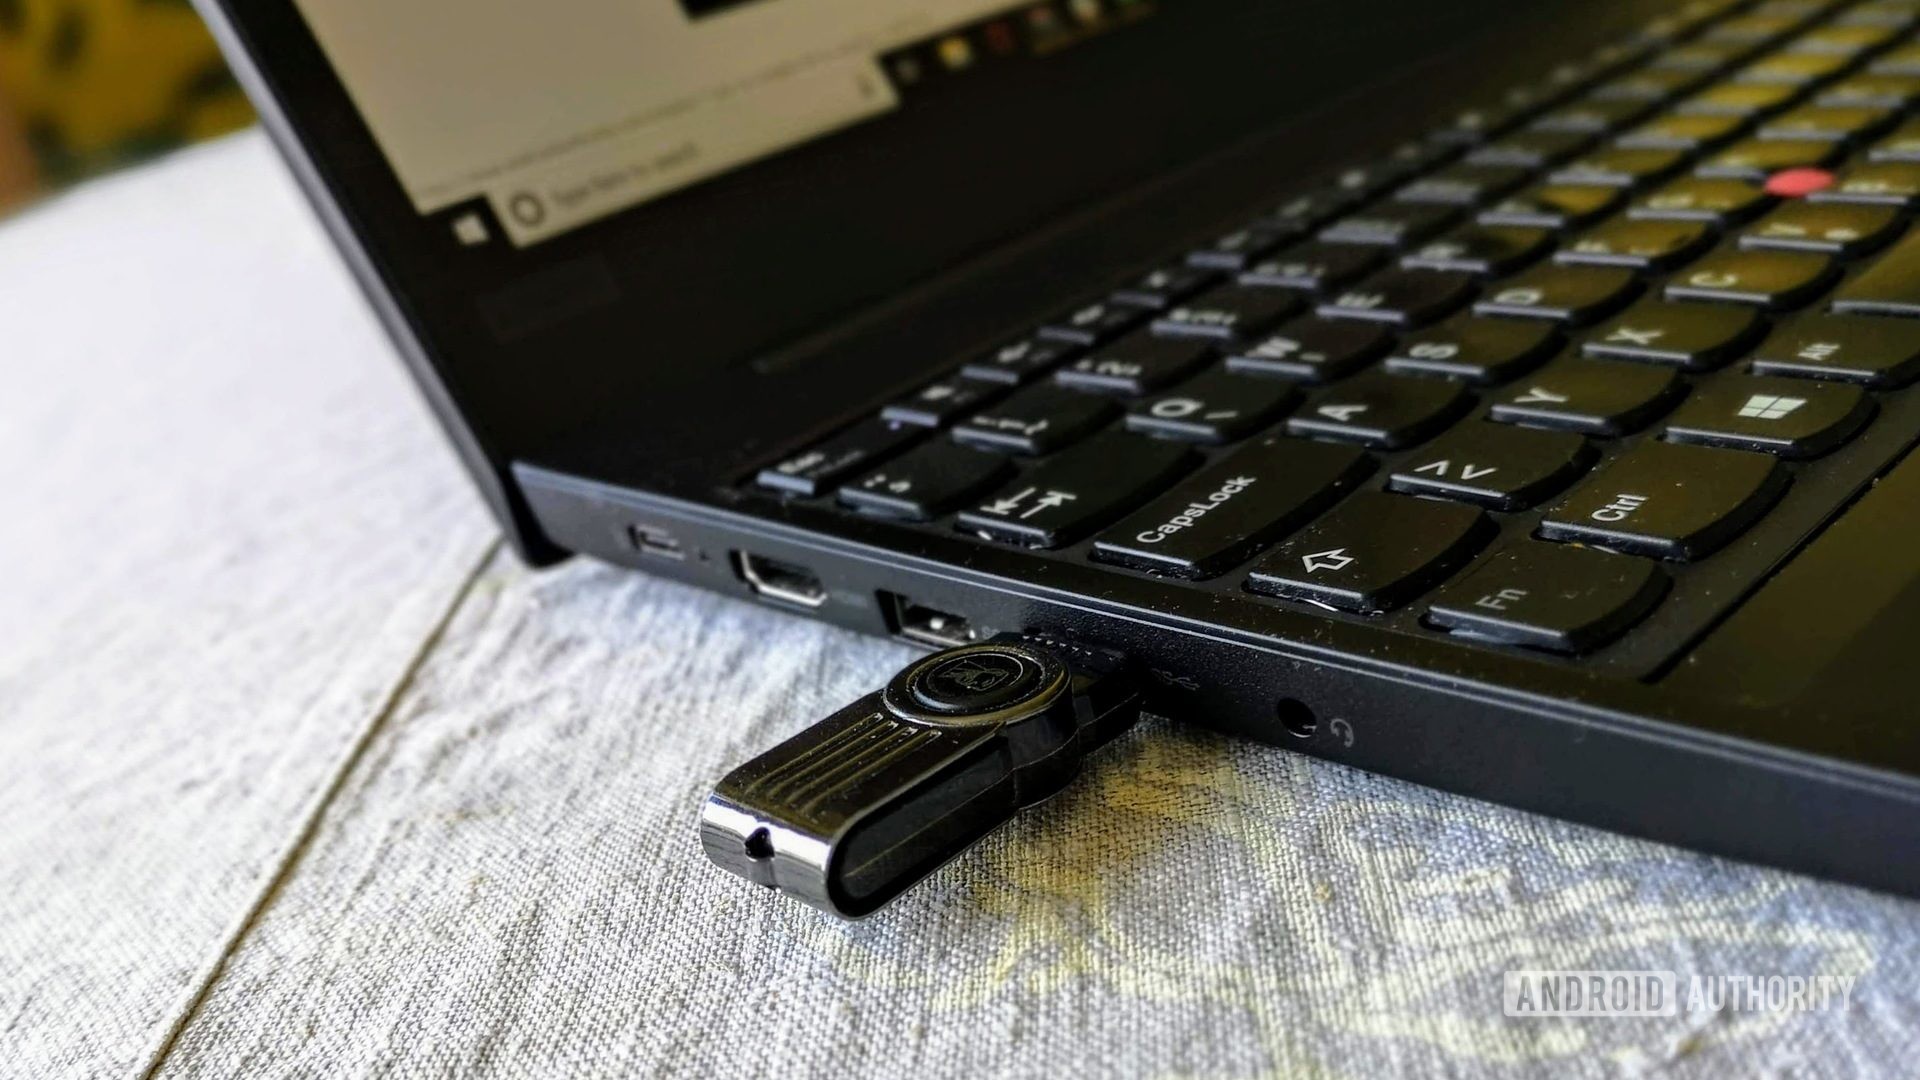 USB flash drive in a computer